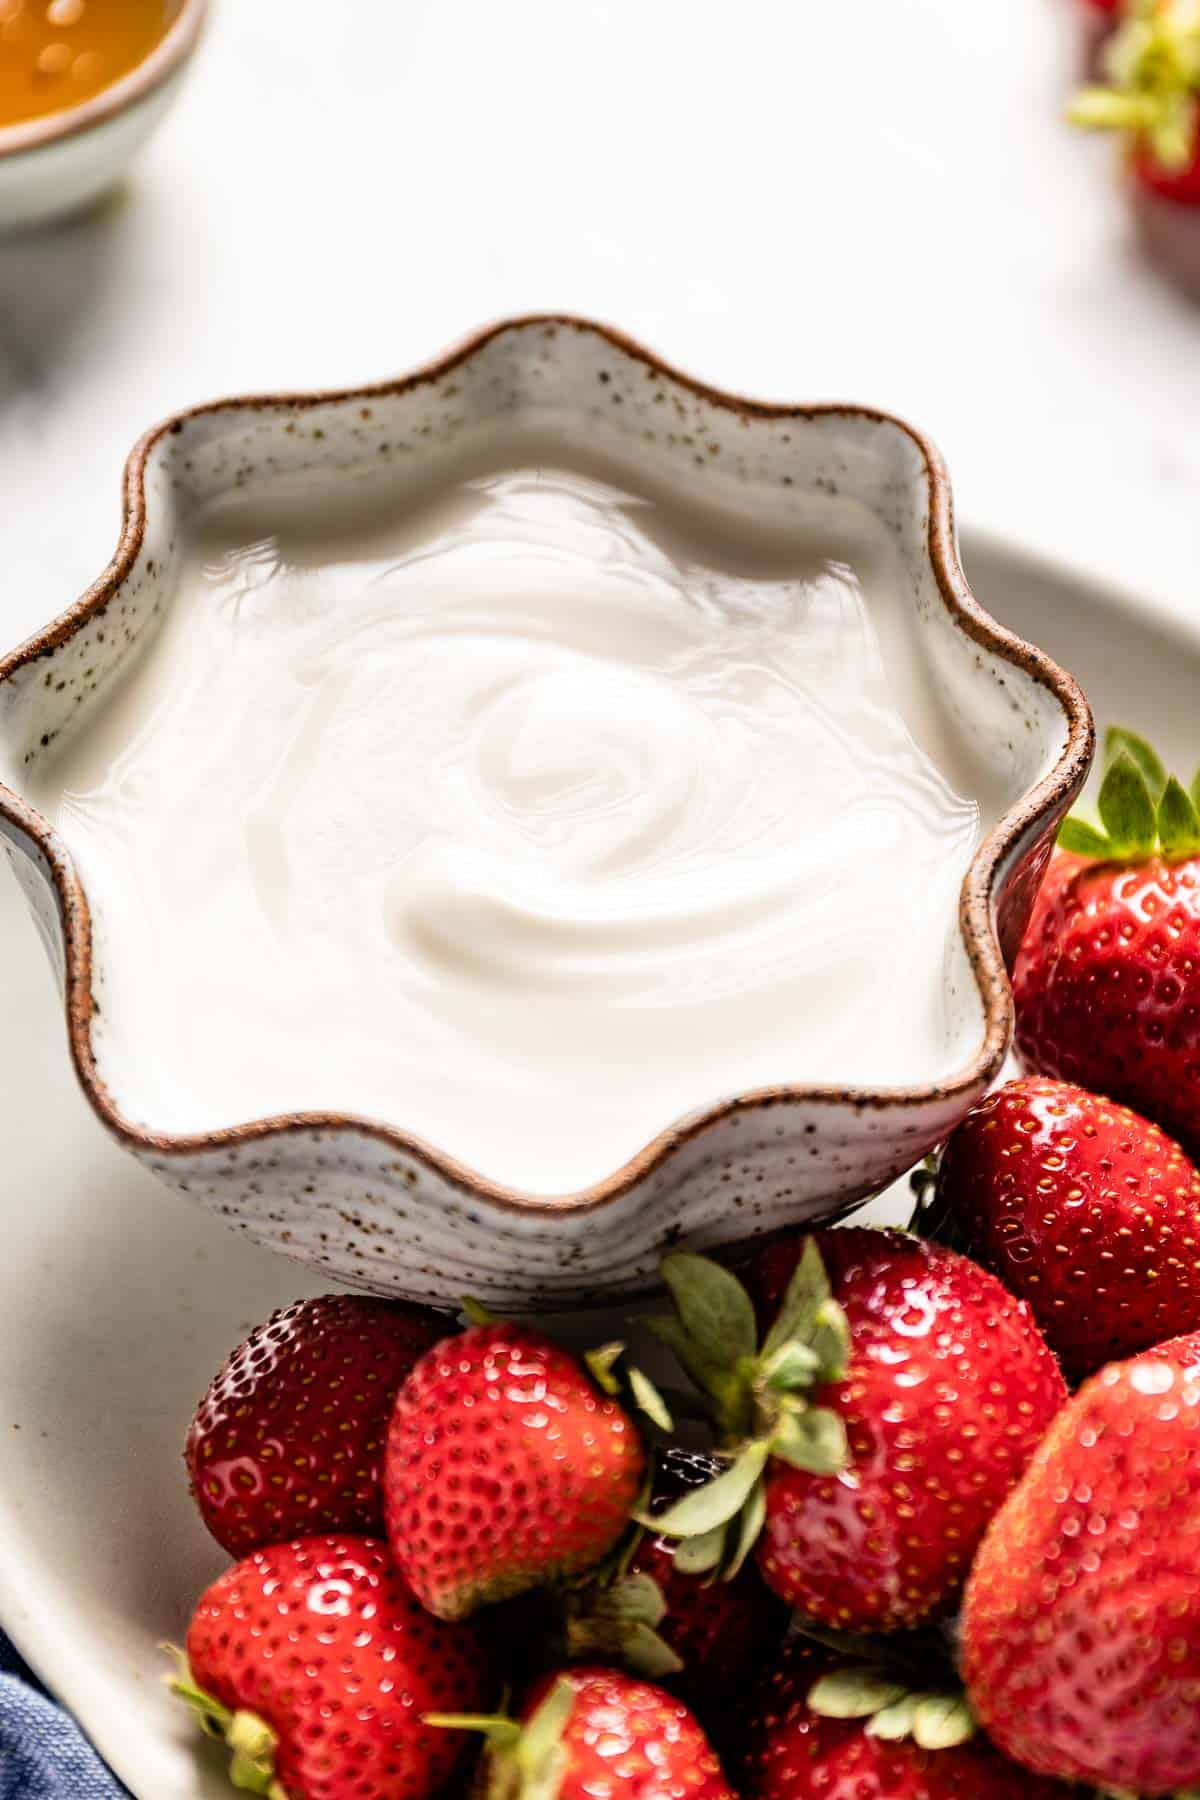 plain vanilla yogurt with honey in a bowl with strawberries on the side from the side view